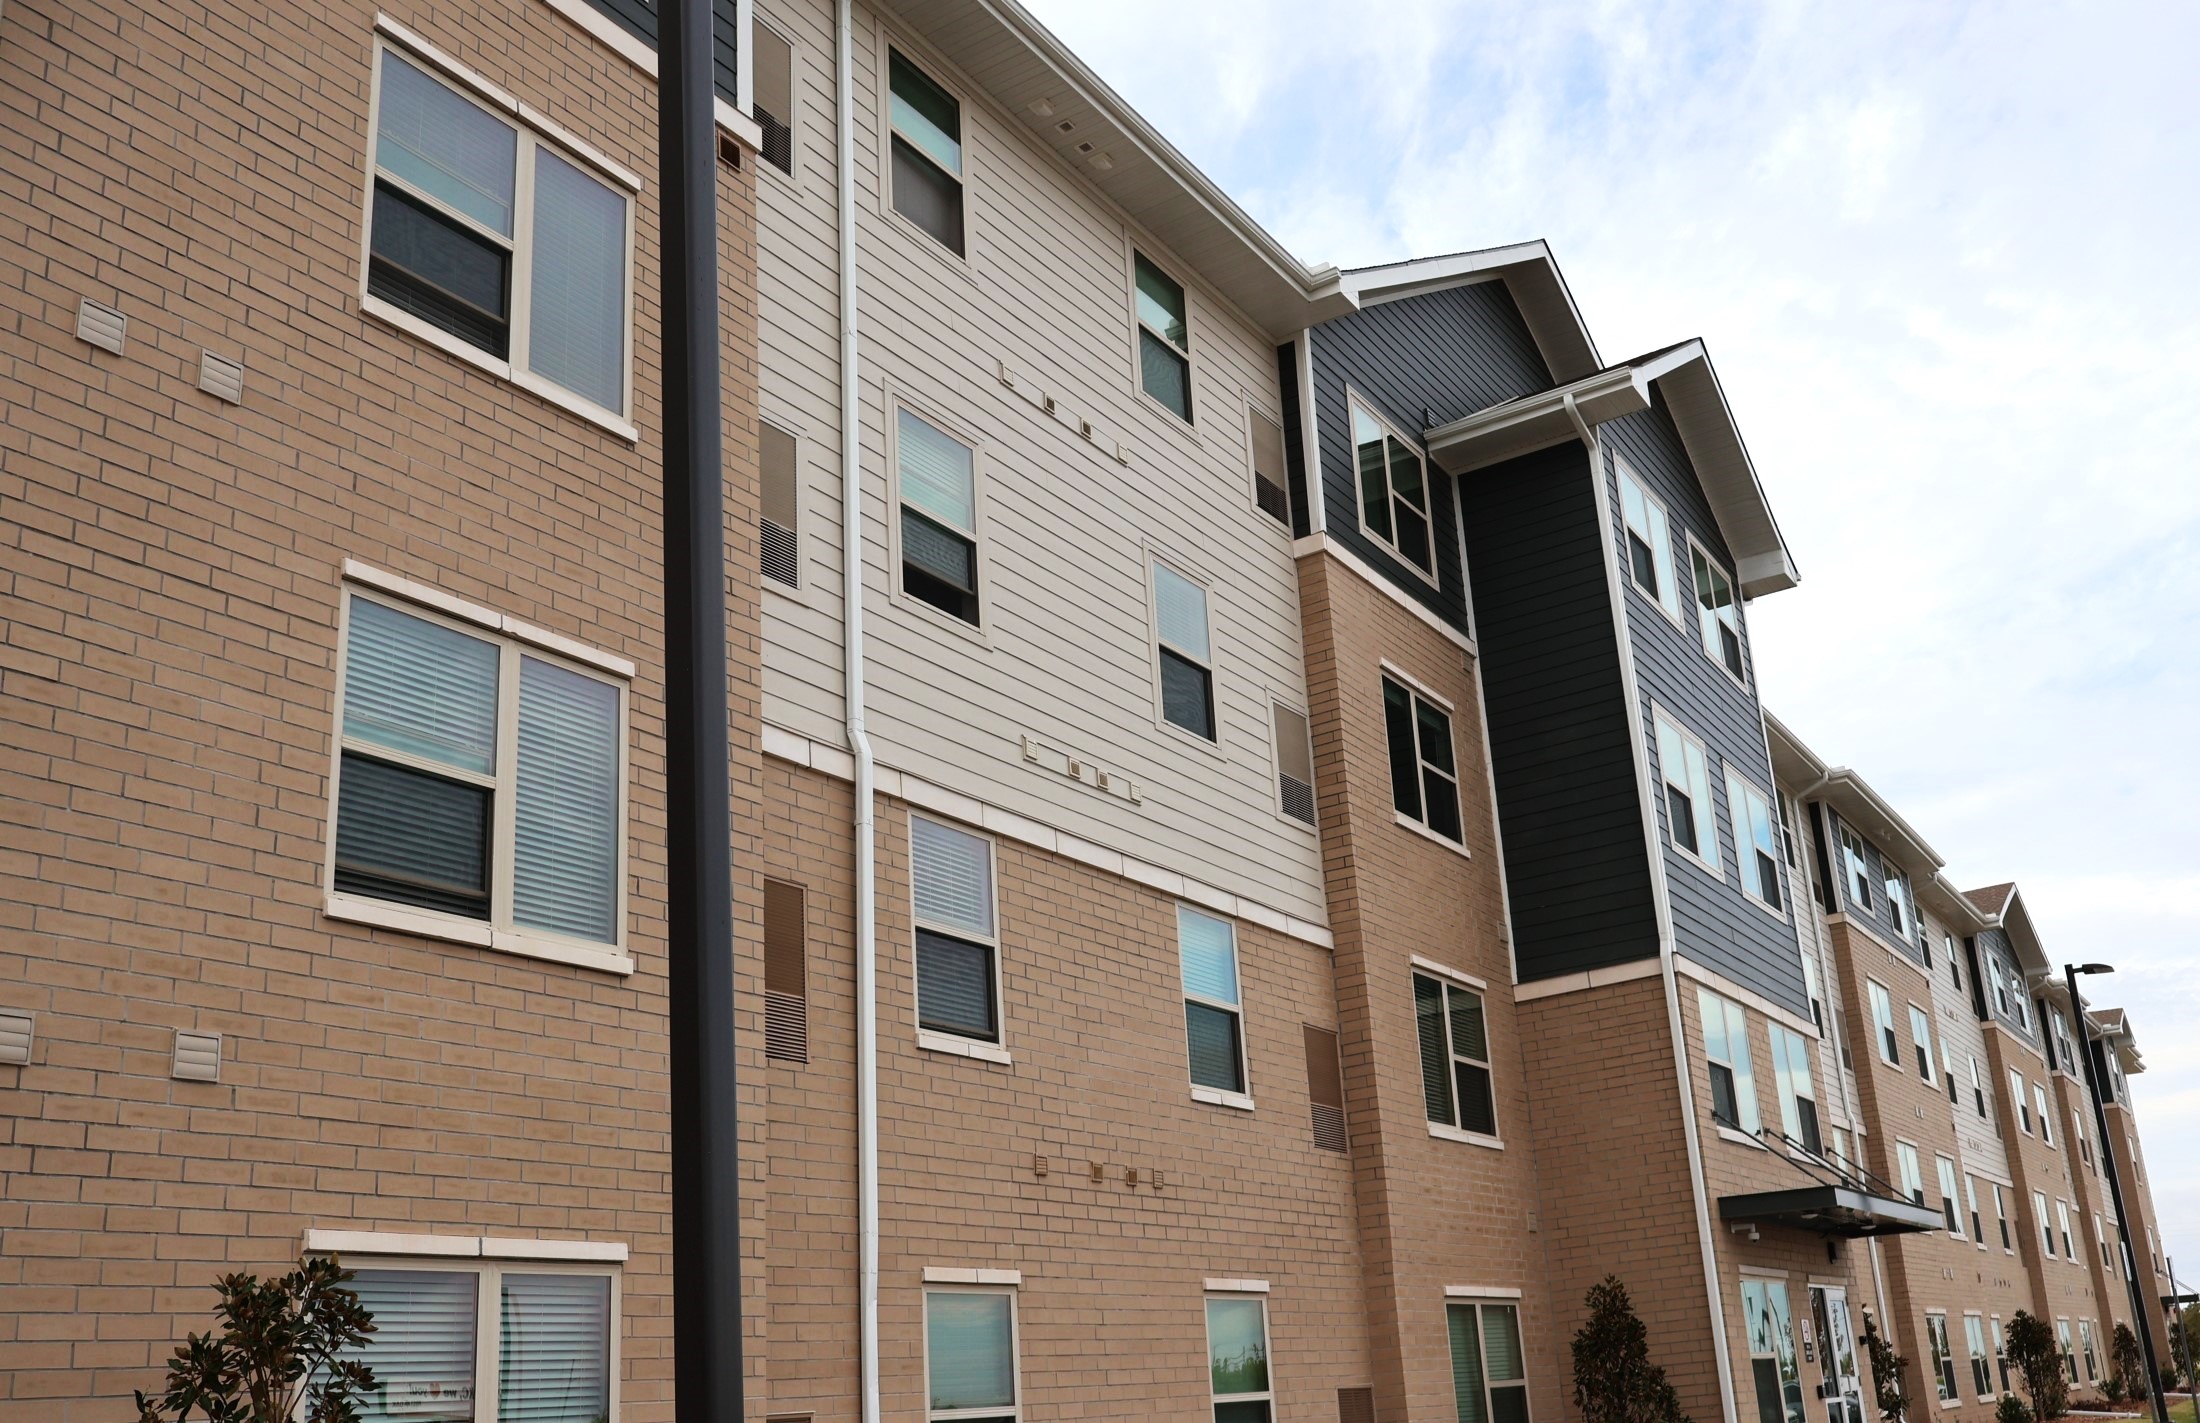 Southern Commons opened its doors in southeast Oklahoma City. This 97-unit development for seniors was made possible with both federal and state Housing Tax Credits.